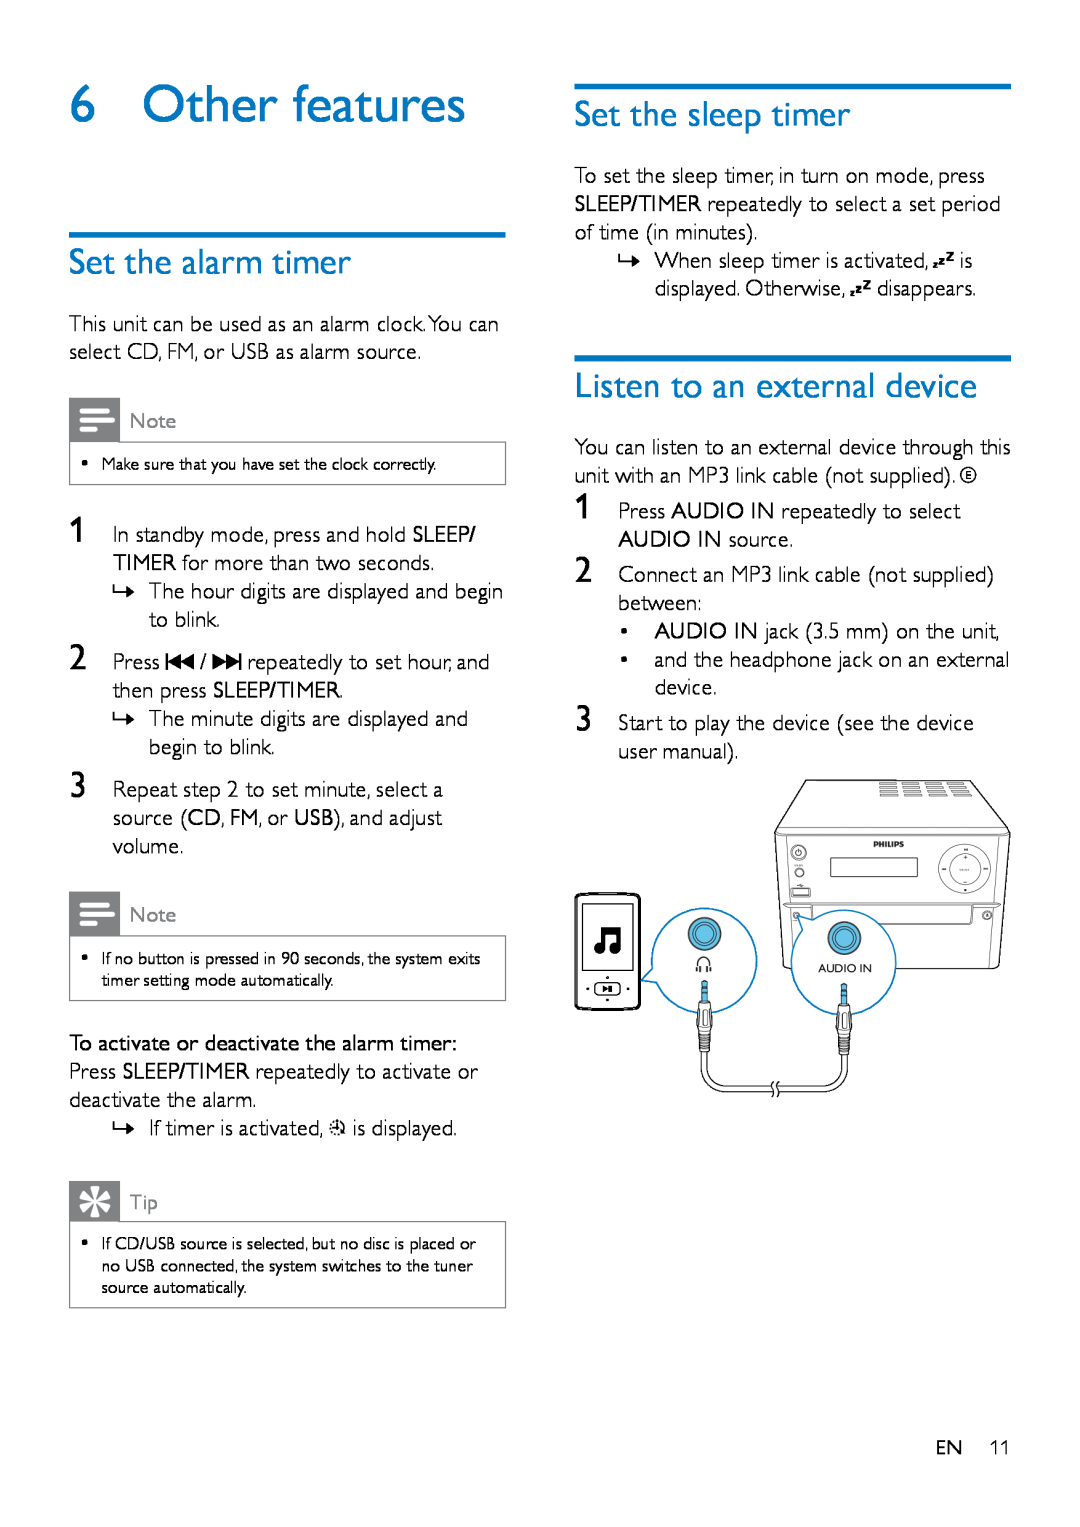 Philips MCM2150 user manual Other features, Set the alarm timer, Set the sleep timer, Listen to an external device 